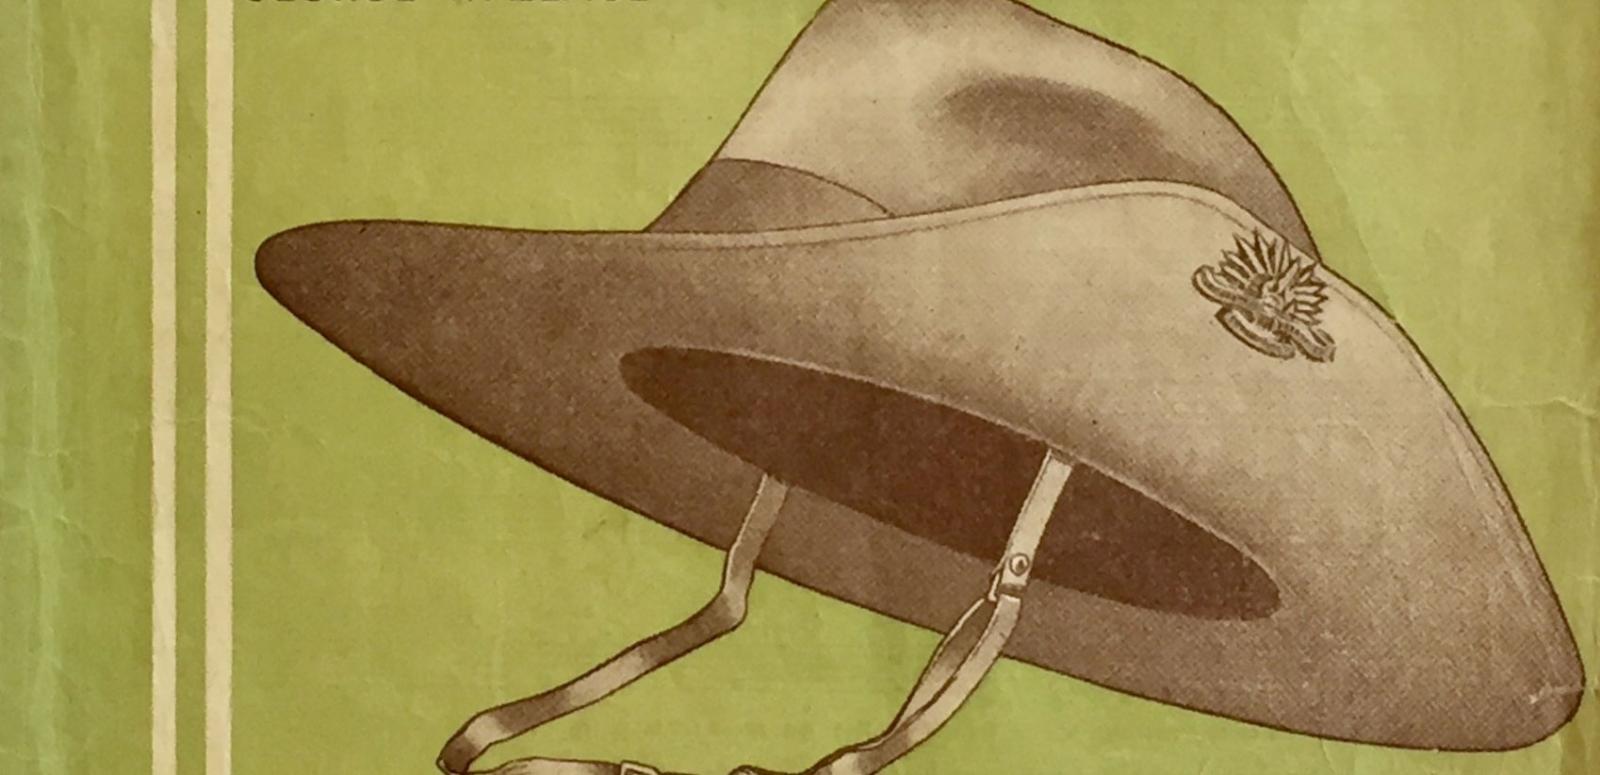 Illustration of an Australian army slouch hat on a yellow-green background.